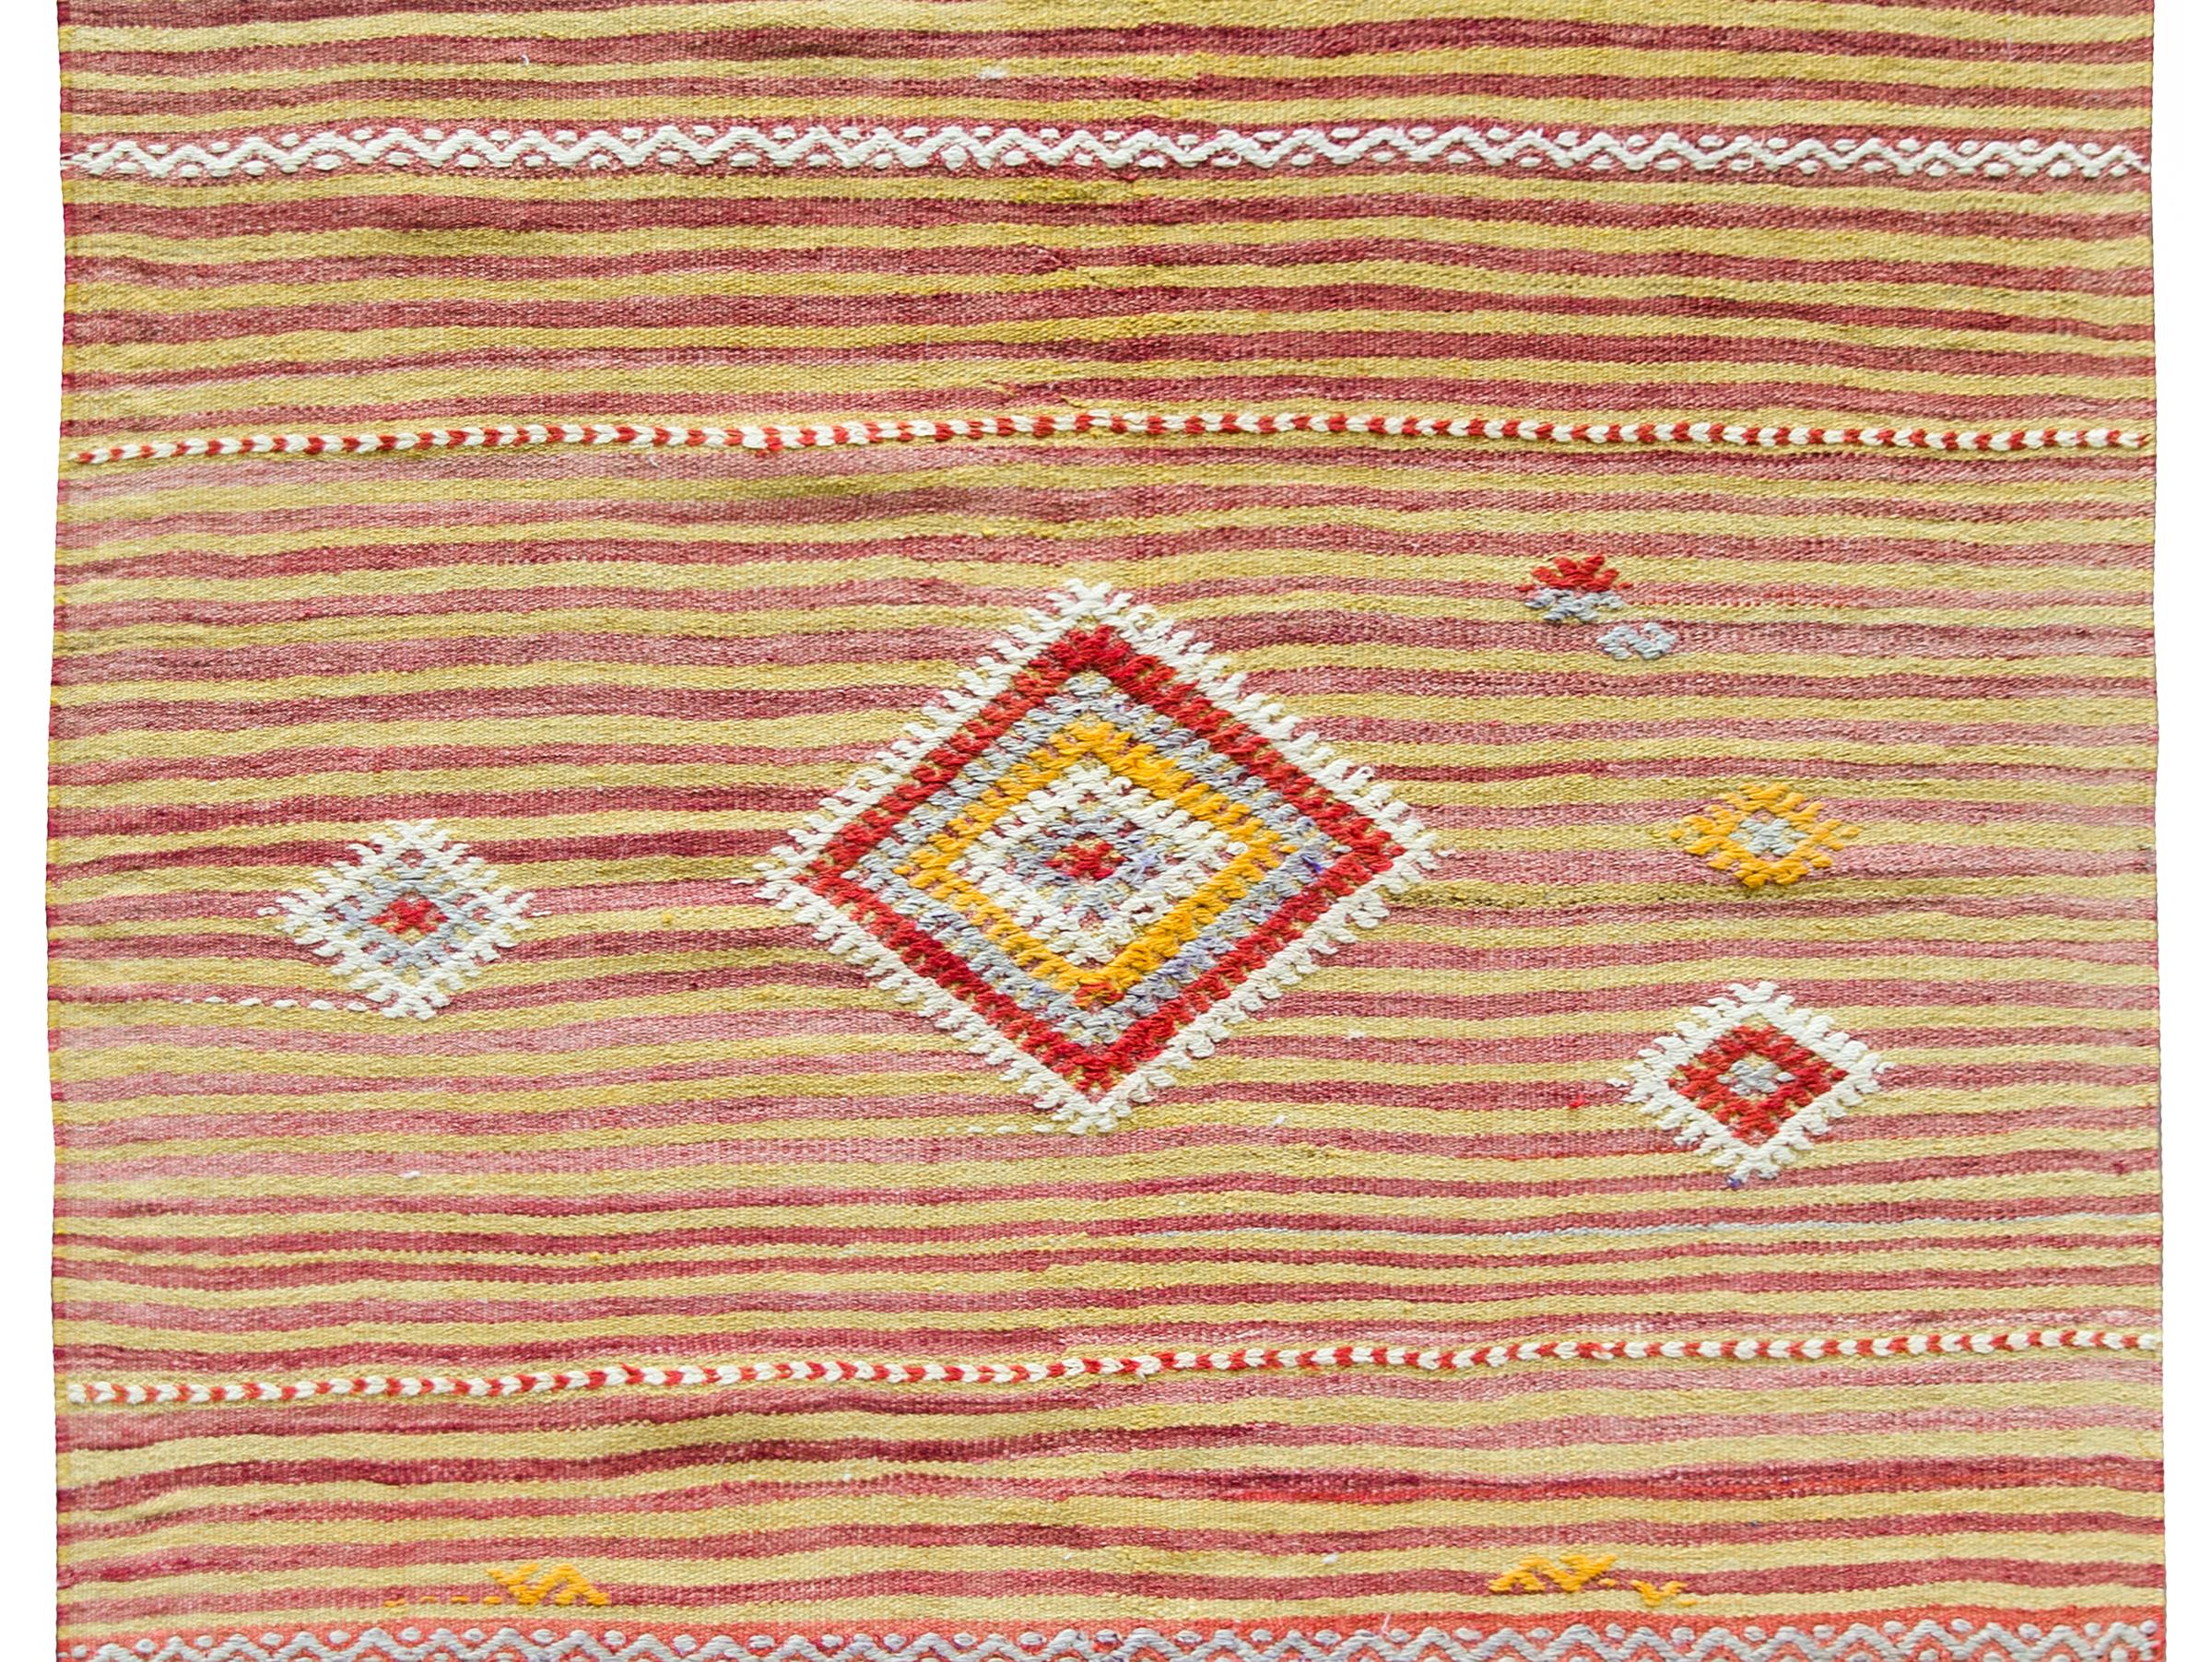 A wonderful vintage Turkish Kilim rug with a beautiful multi-colored stripe pattern with several diamond patterns asymmetrical embroidered into the field.